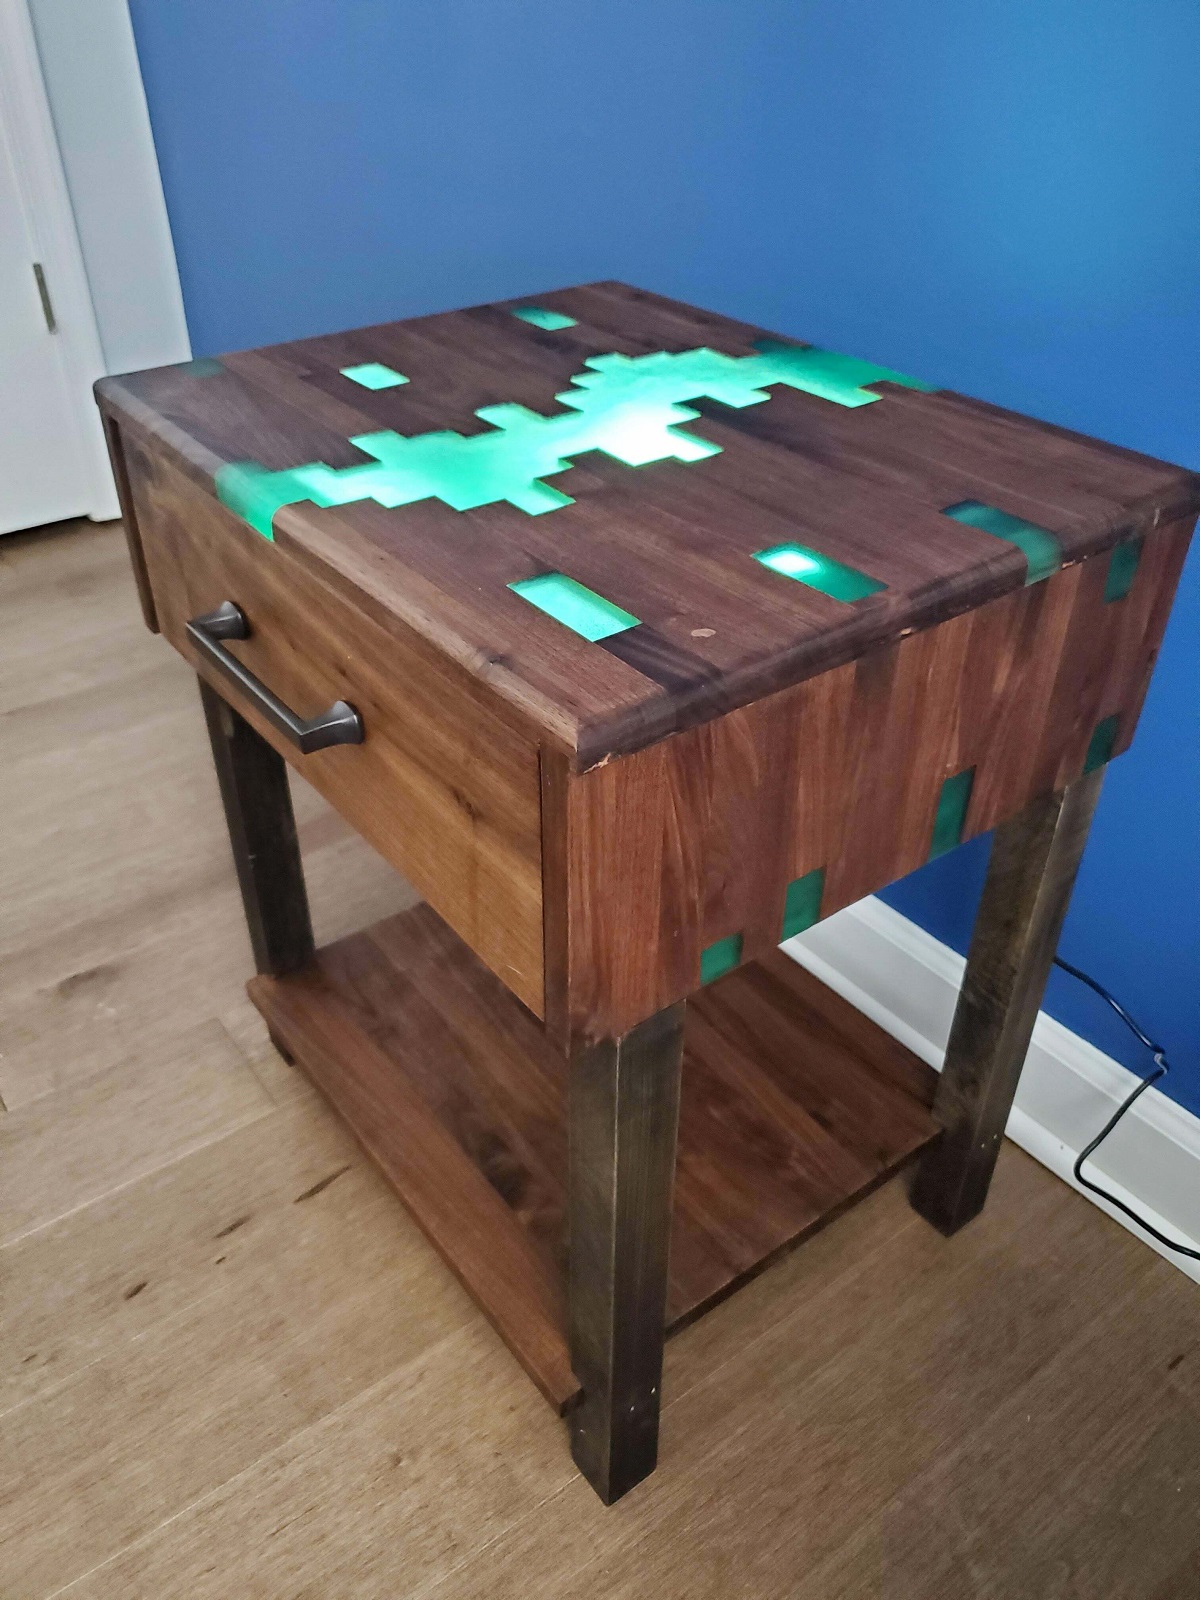 Walnut Side Table With Epoxy. LED Light Strip Underneath For Lighting Effect